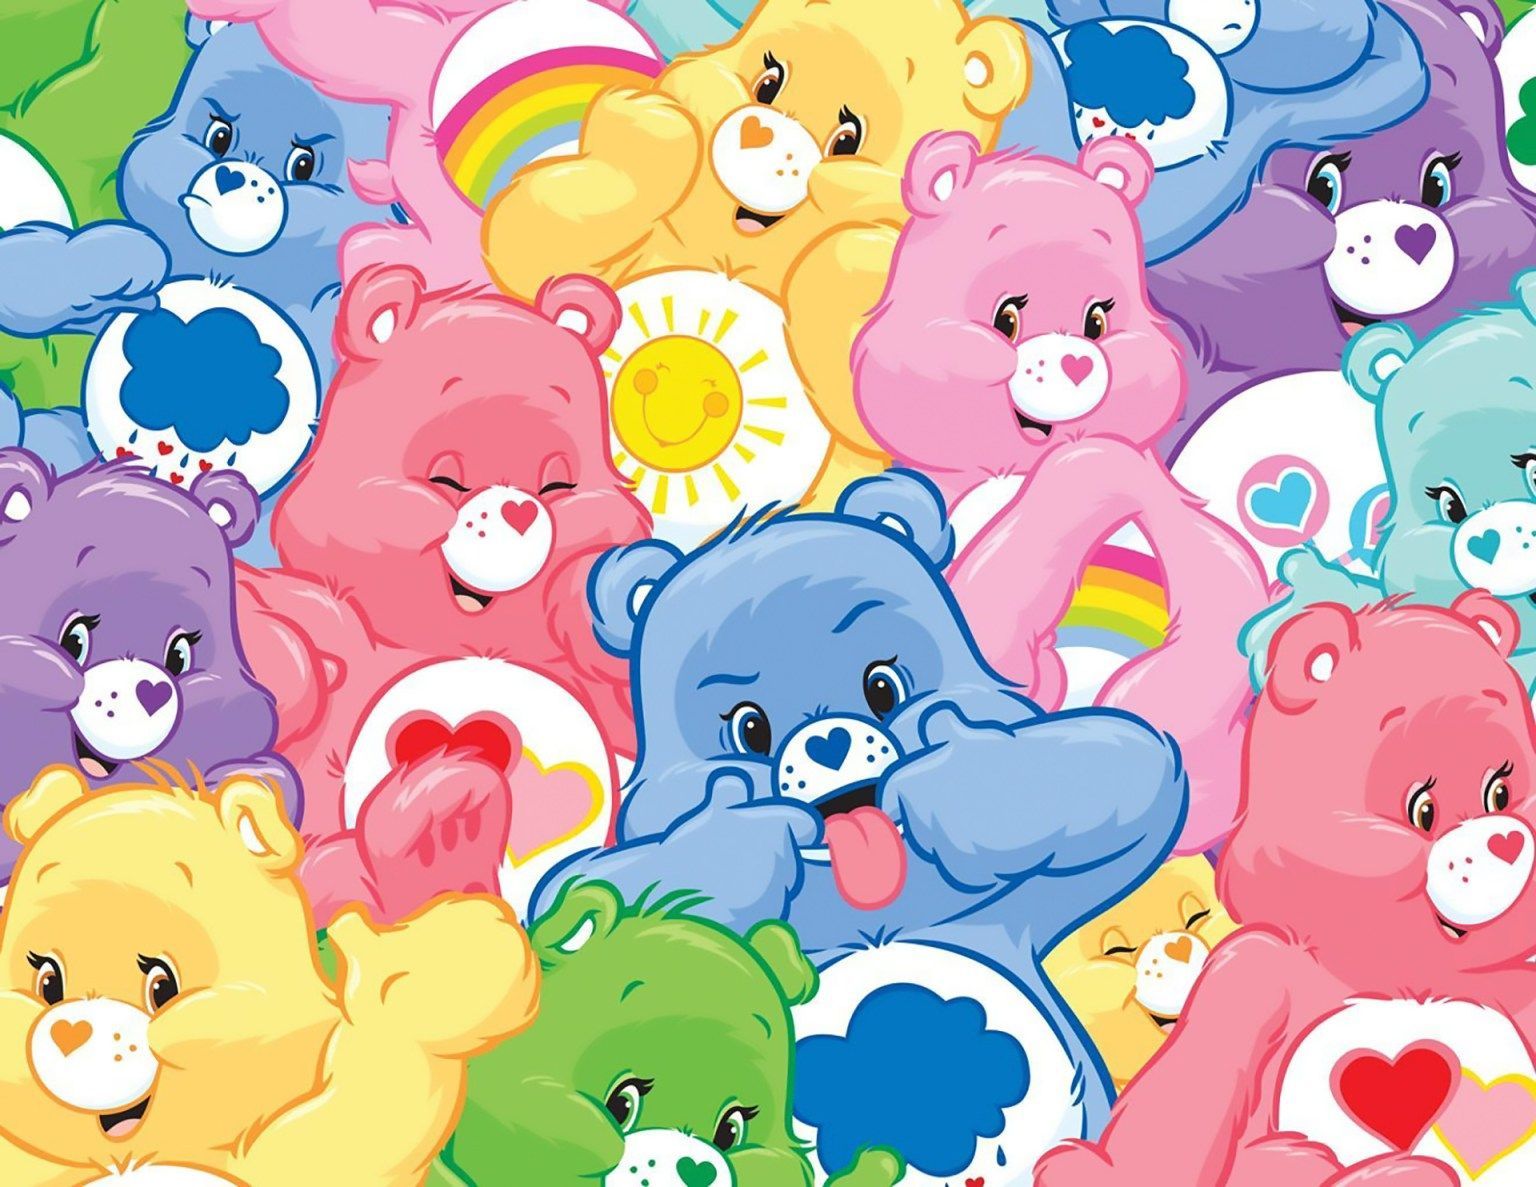 The Care Bears are a group of bears that are used to teach children about caring for one another. - Care Bears